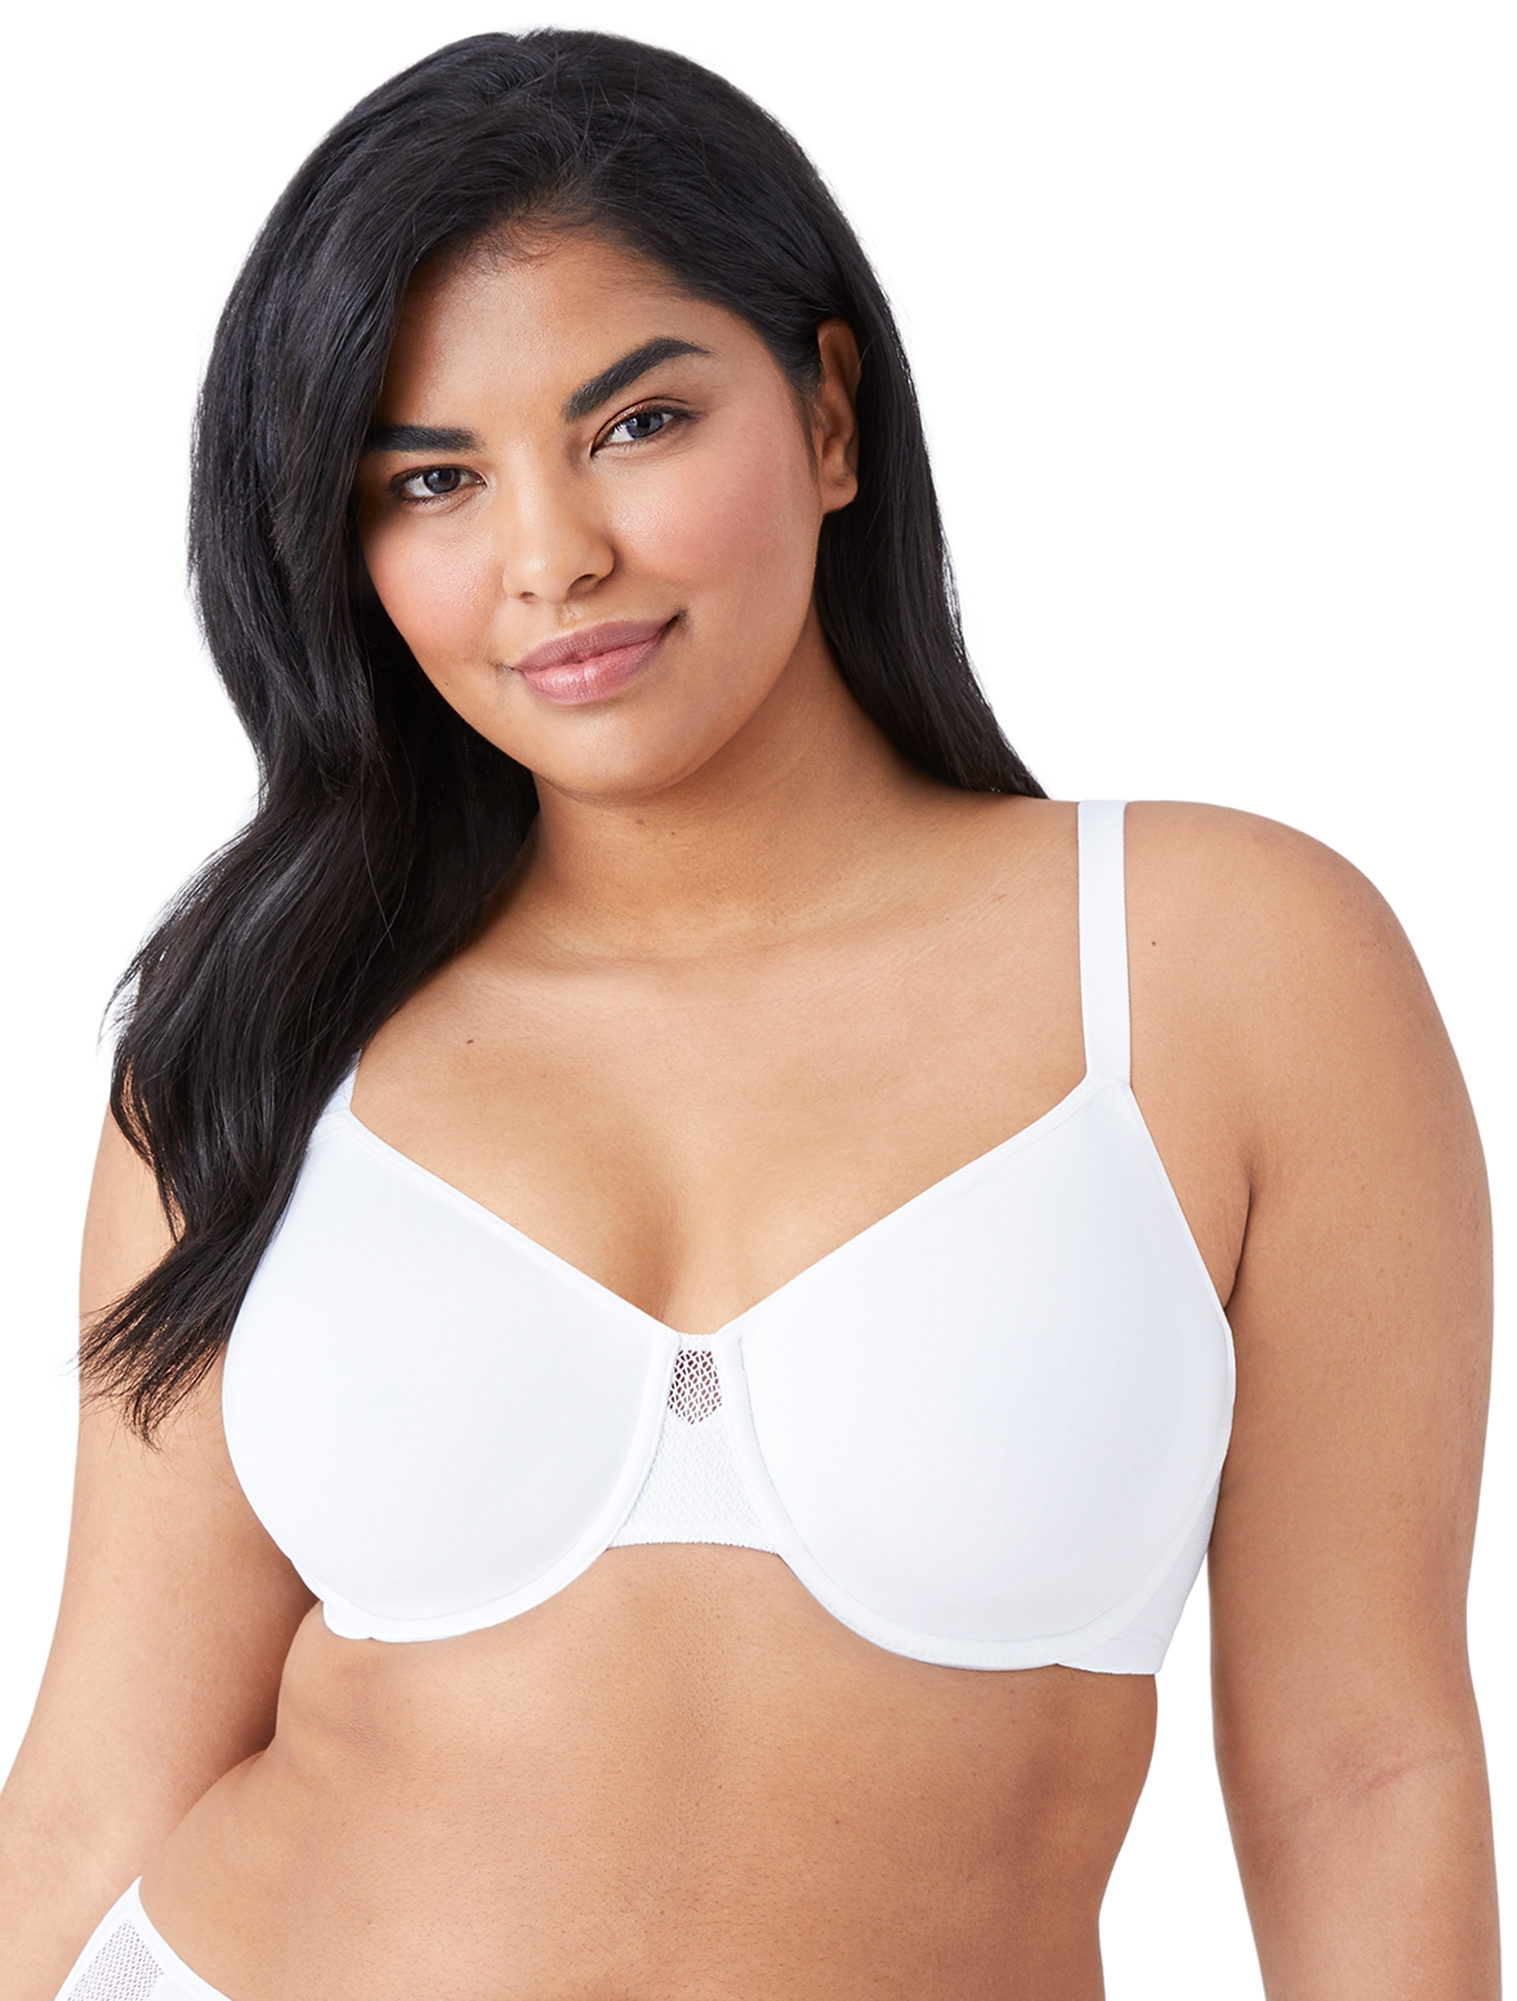 Red Underwire T-shirt Bra with White Towel Background. Stock Photo - Image  of underwire, towel: 231378158